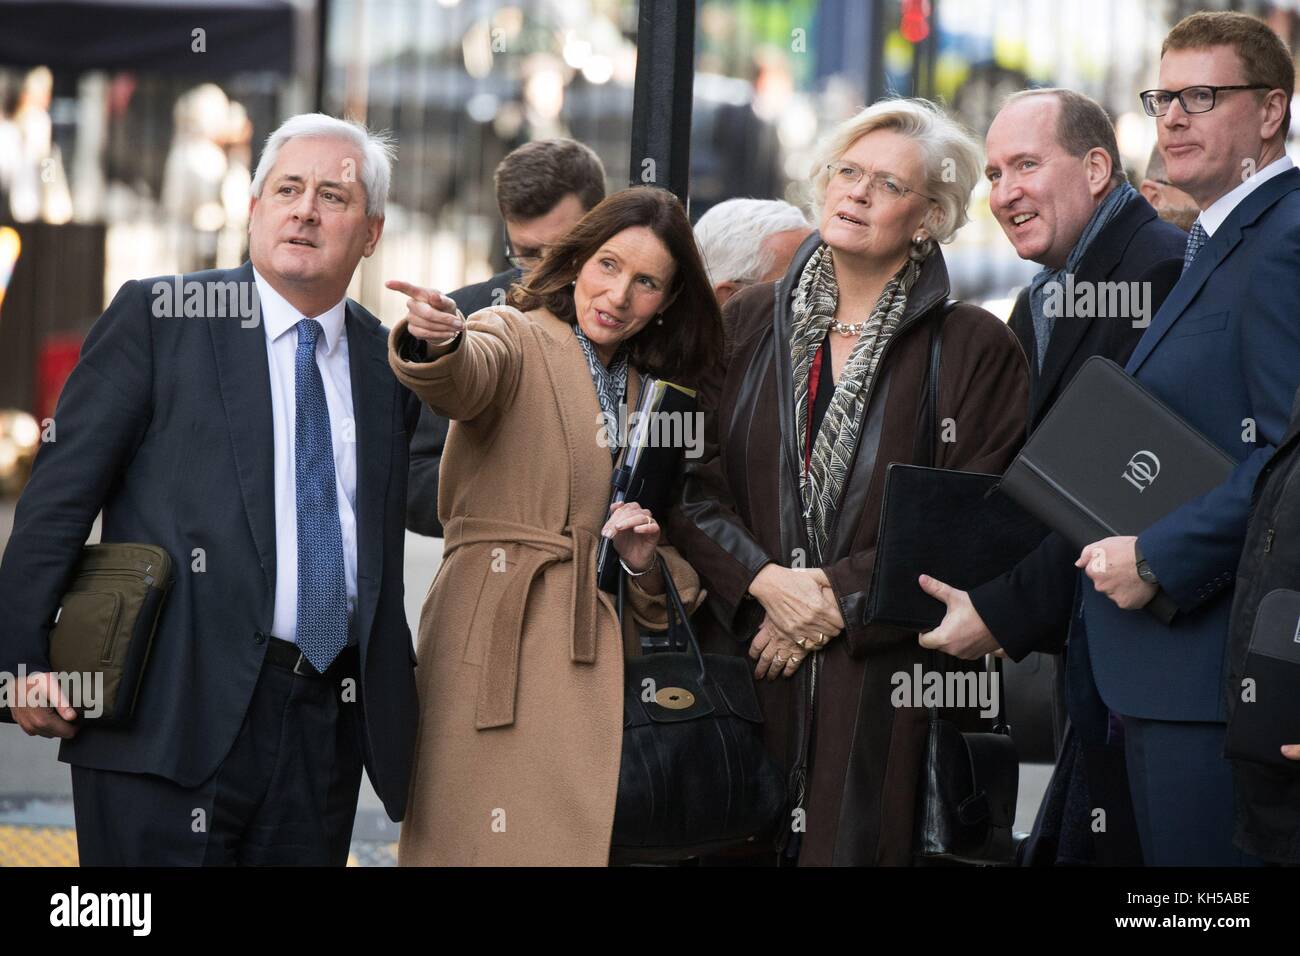 CBI President Paul Drechsler (left), CBI director general Carolyn Fairbairn (second left) and IoD director general Stephen Martin (right) arriving in Downing Street, London, where business leaders from Europe were due to meet with Prime Minister Theresa May to discuss the future of UK-EU trade post-Brexit. Stock Photo